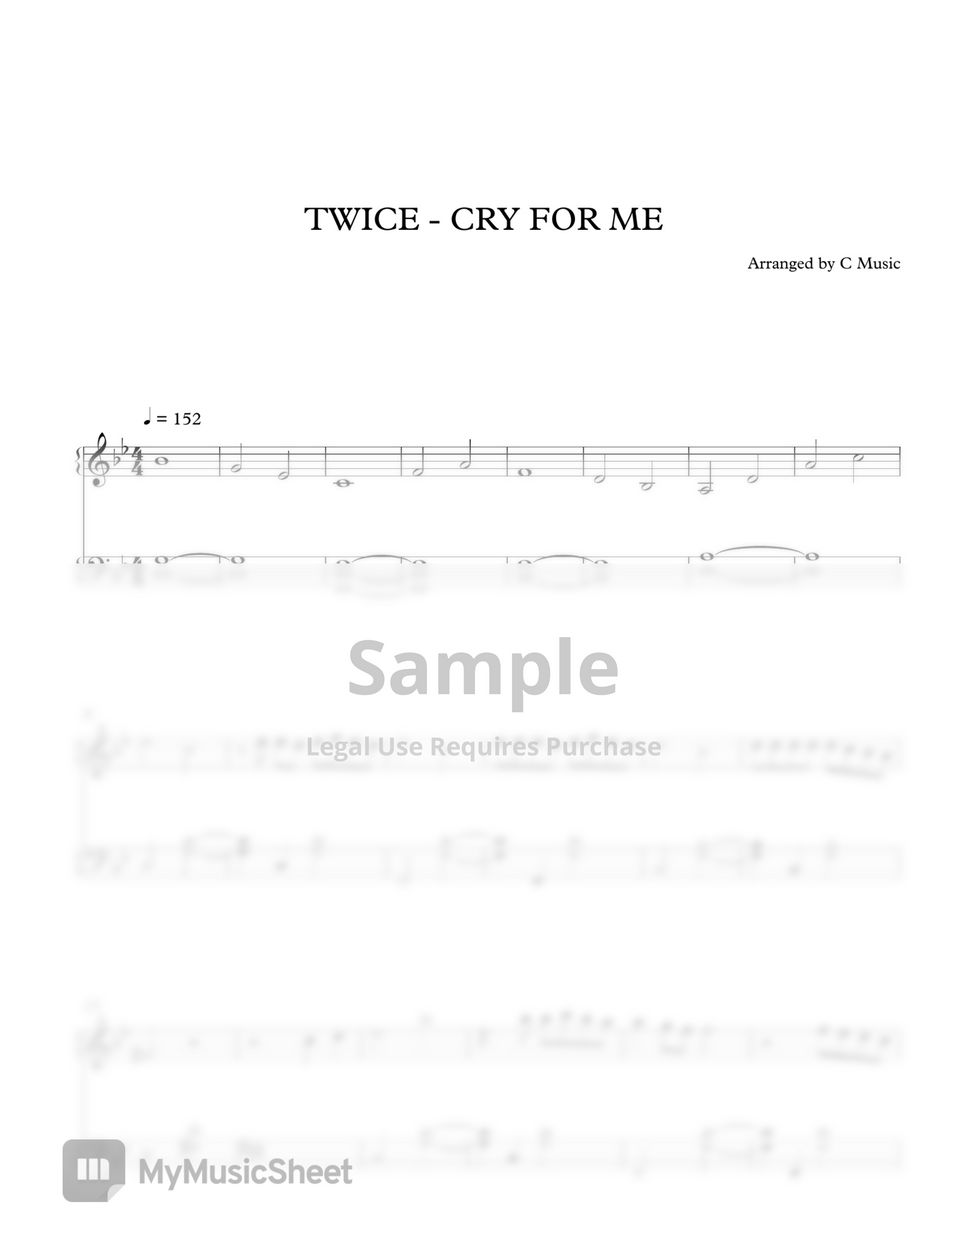 TWICE - Cry for Me by C Music